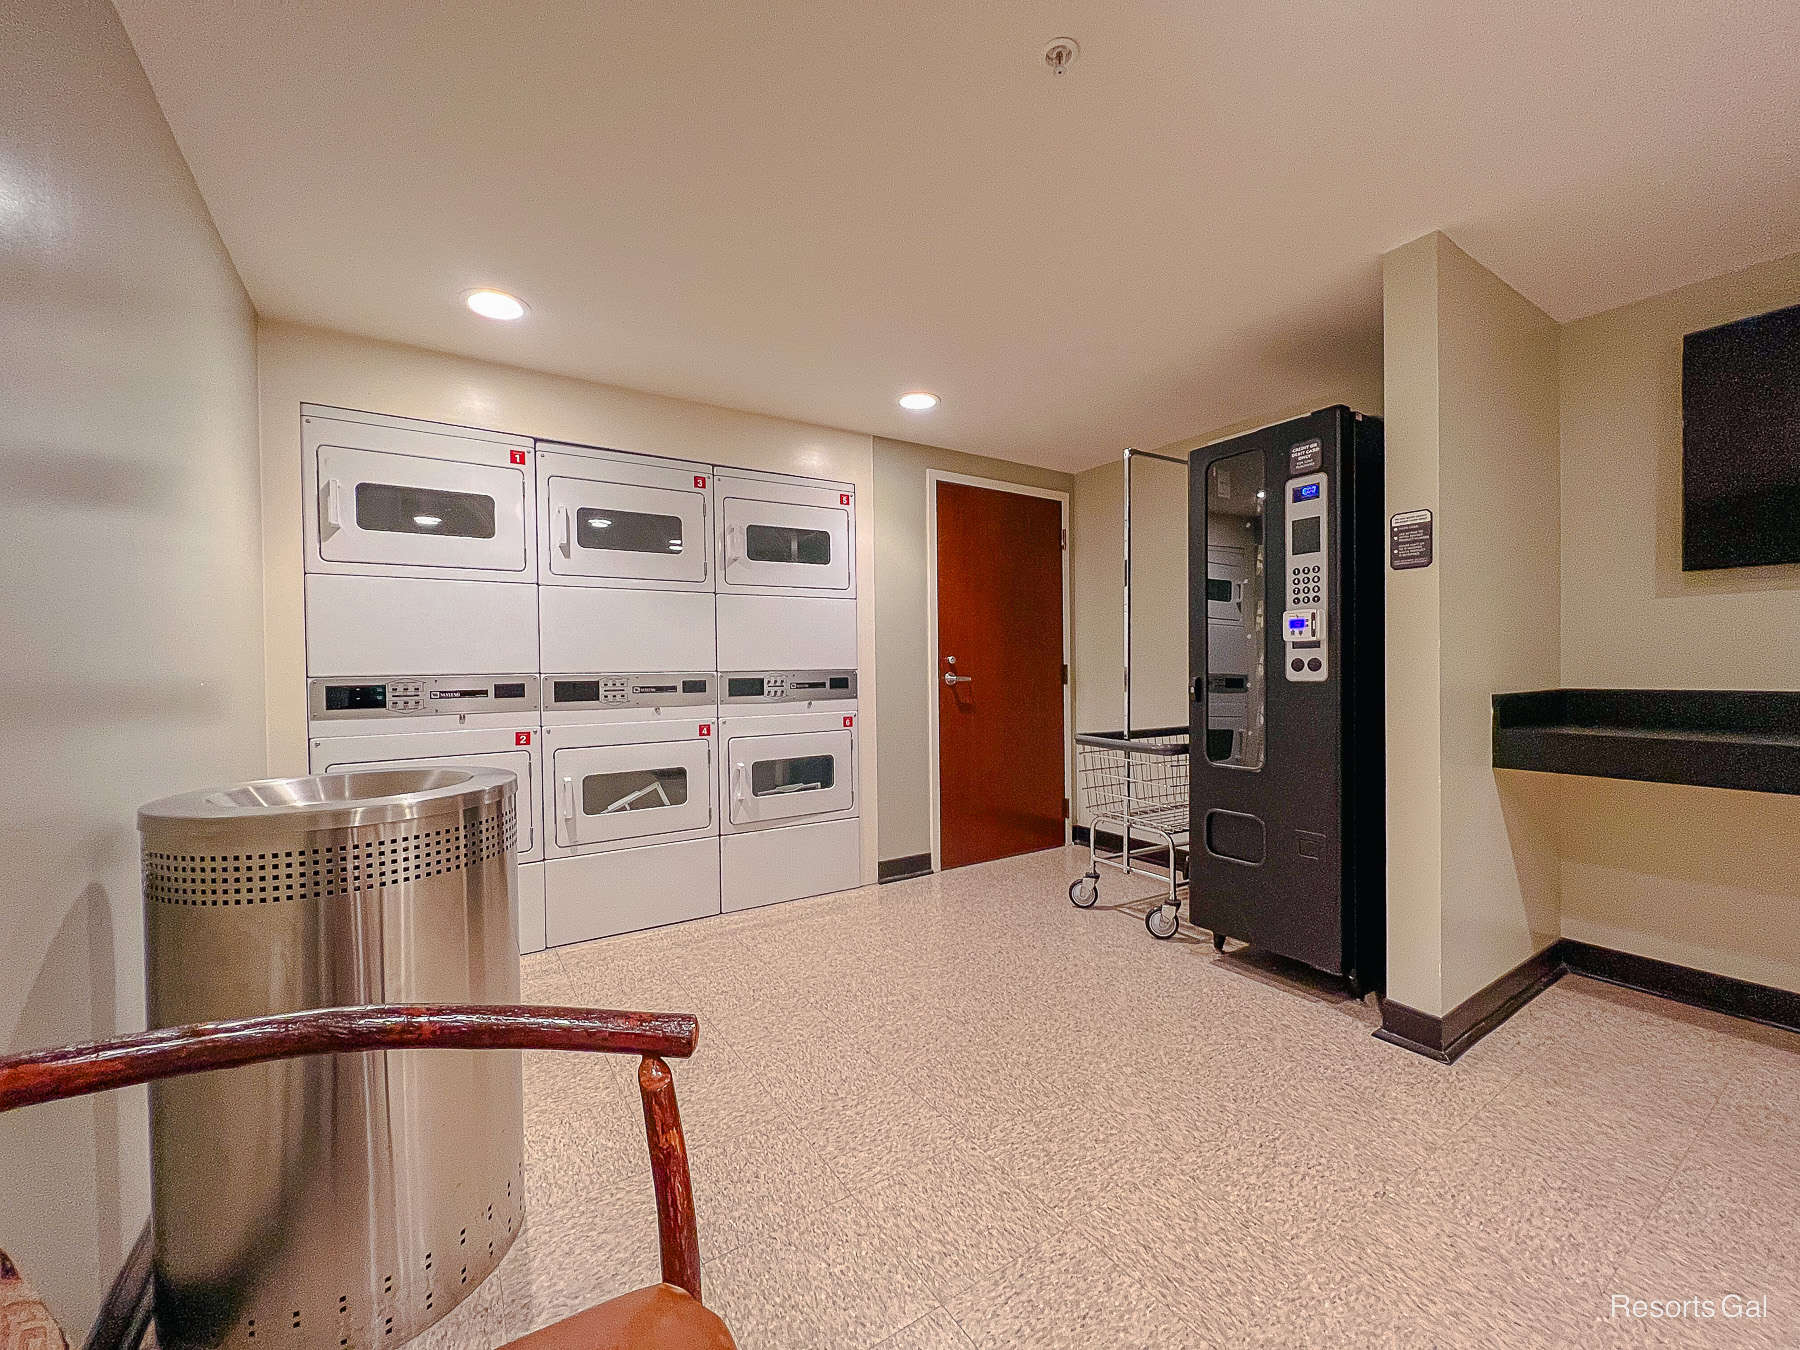 an interior view of the Copper Creek laundry room 